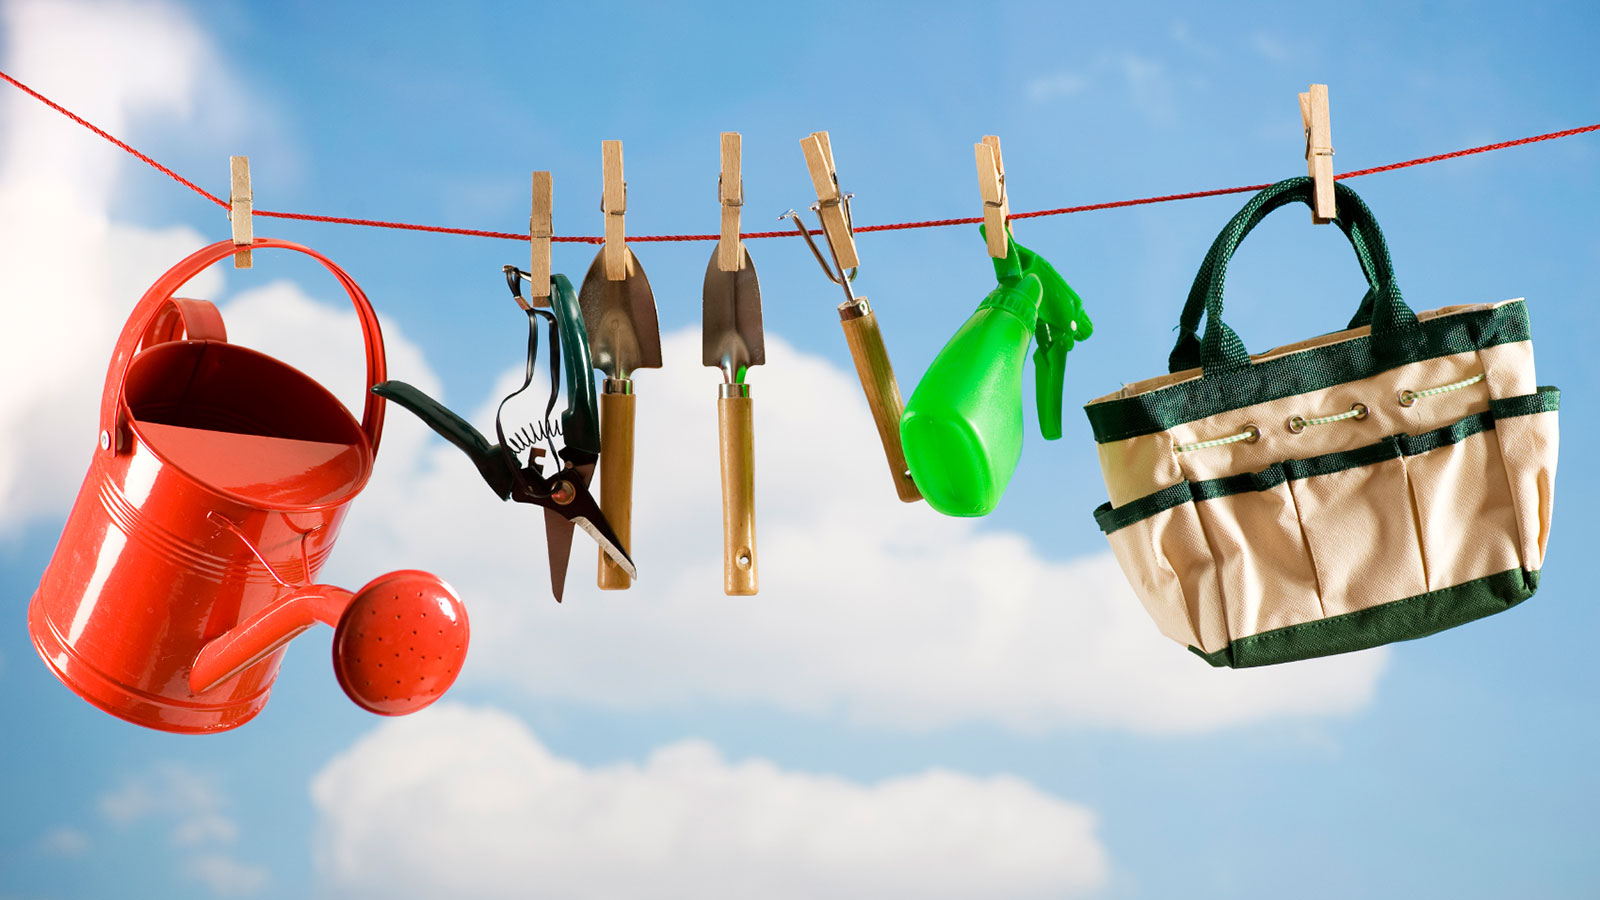 Gardening tools hung up on clothesline